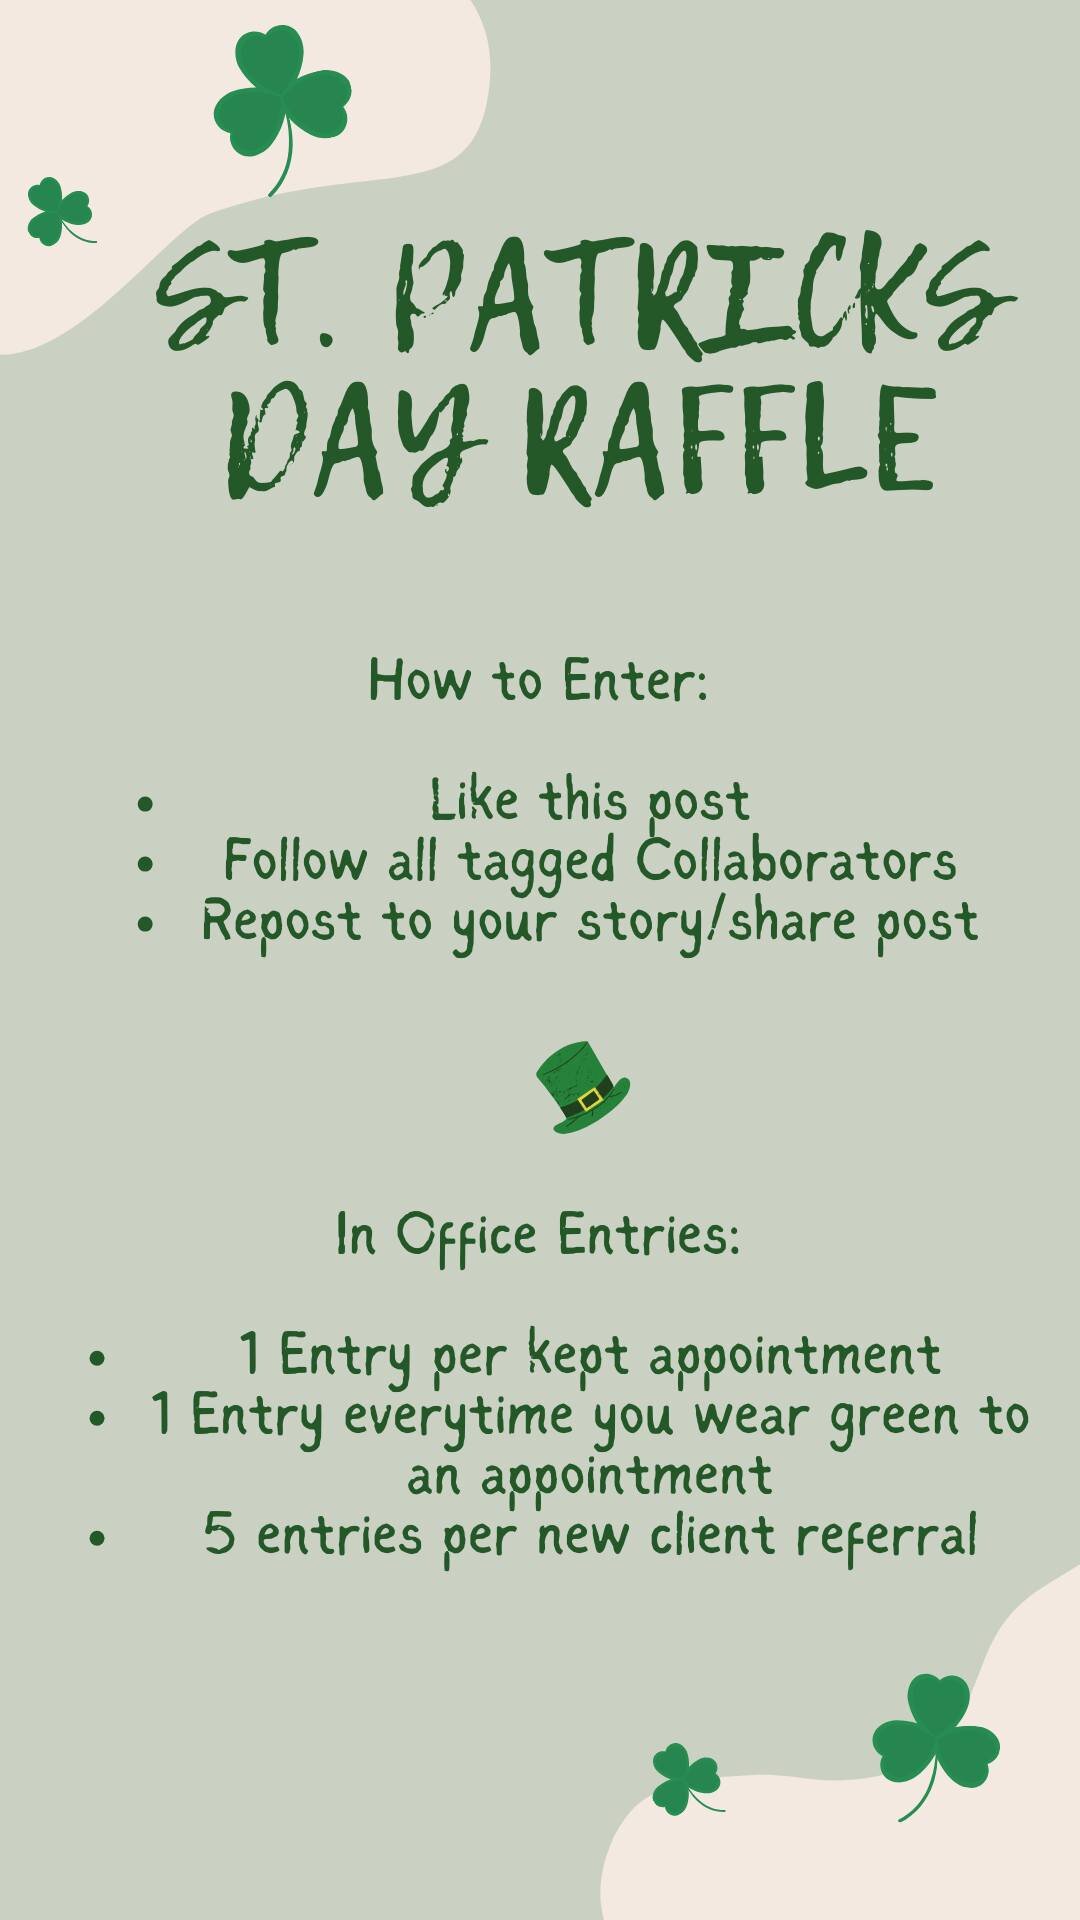 ☘️ Feeling lucky? 🍀 Enter our St. Patrick's Day raffle for a chance to win the ultimate prize pack! 🎉🌈 Simply follow the instructions in the photo to enter. 📸✨ Don't miss out on your chance to win a potted garden from Wild Blossom Design, 2 ticke